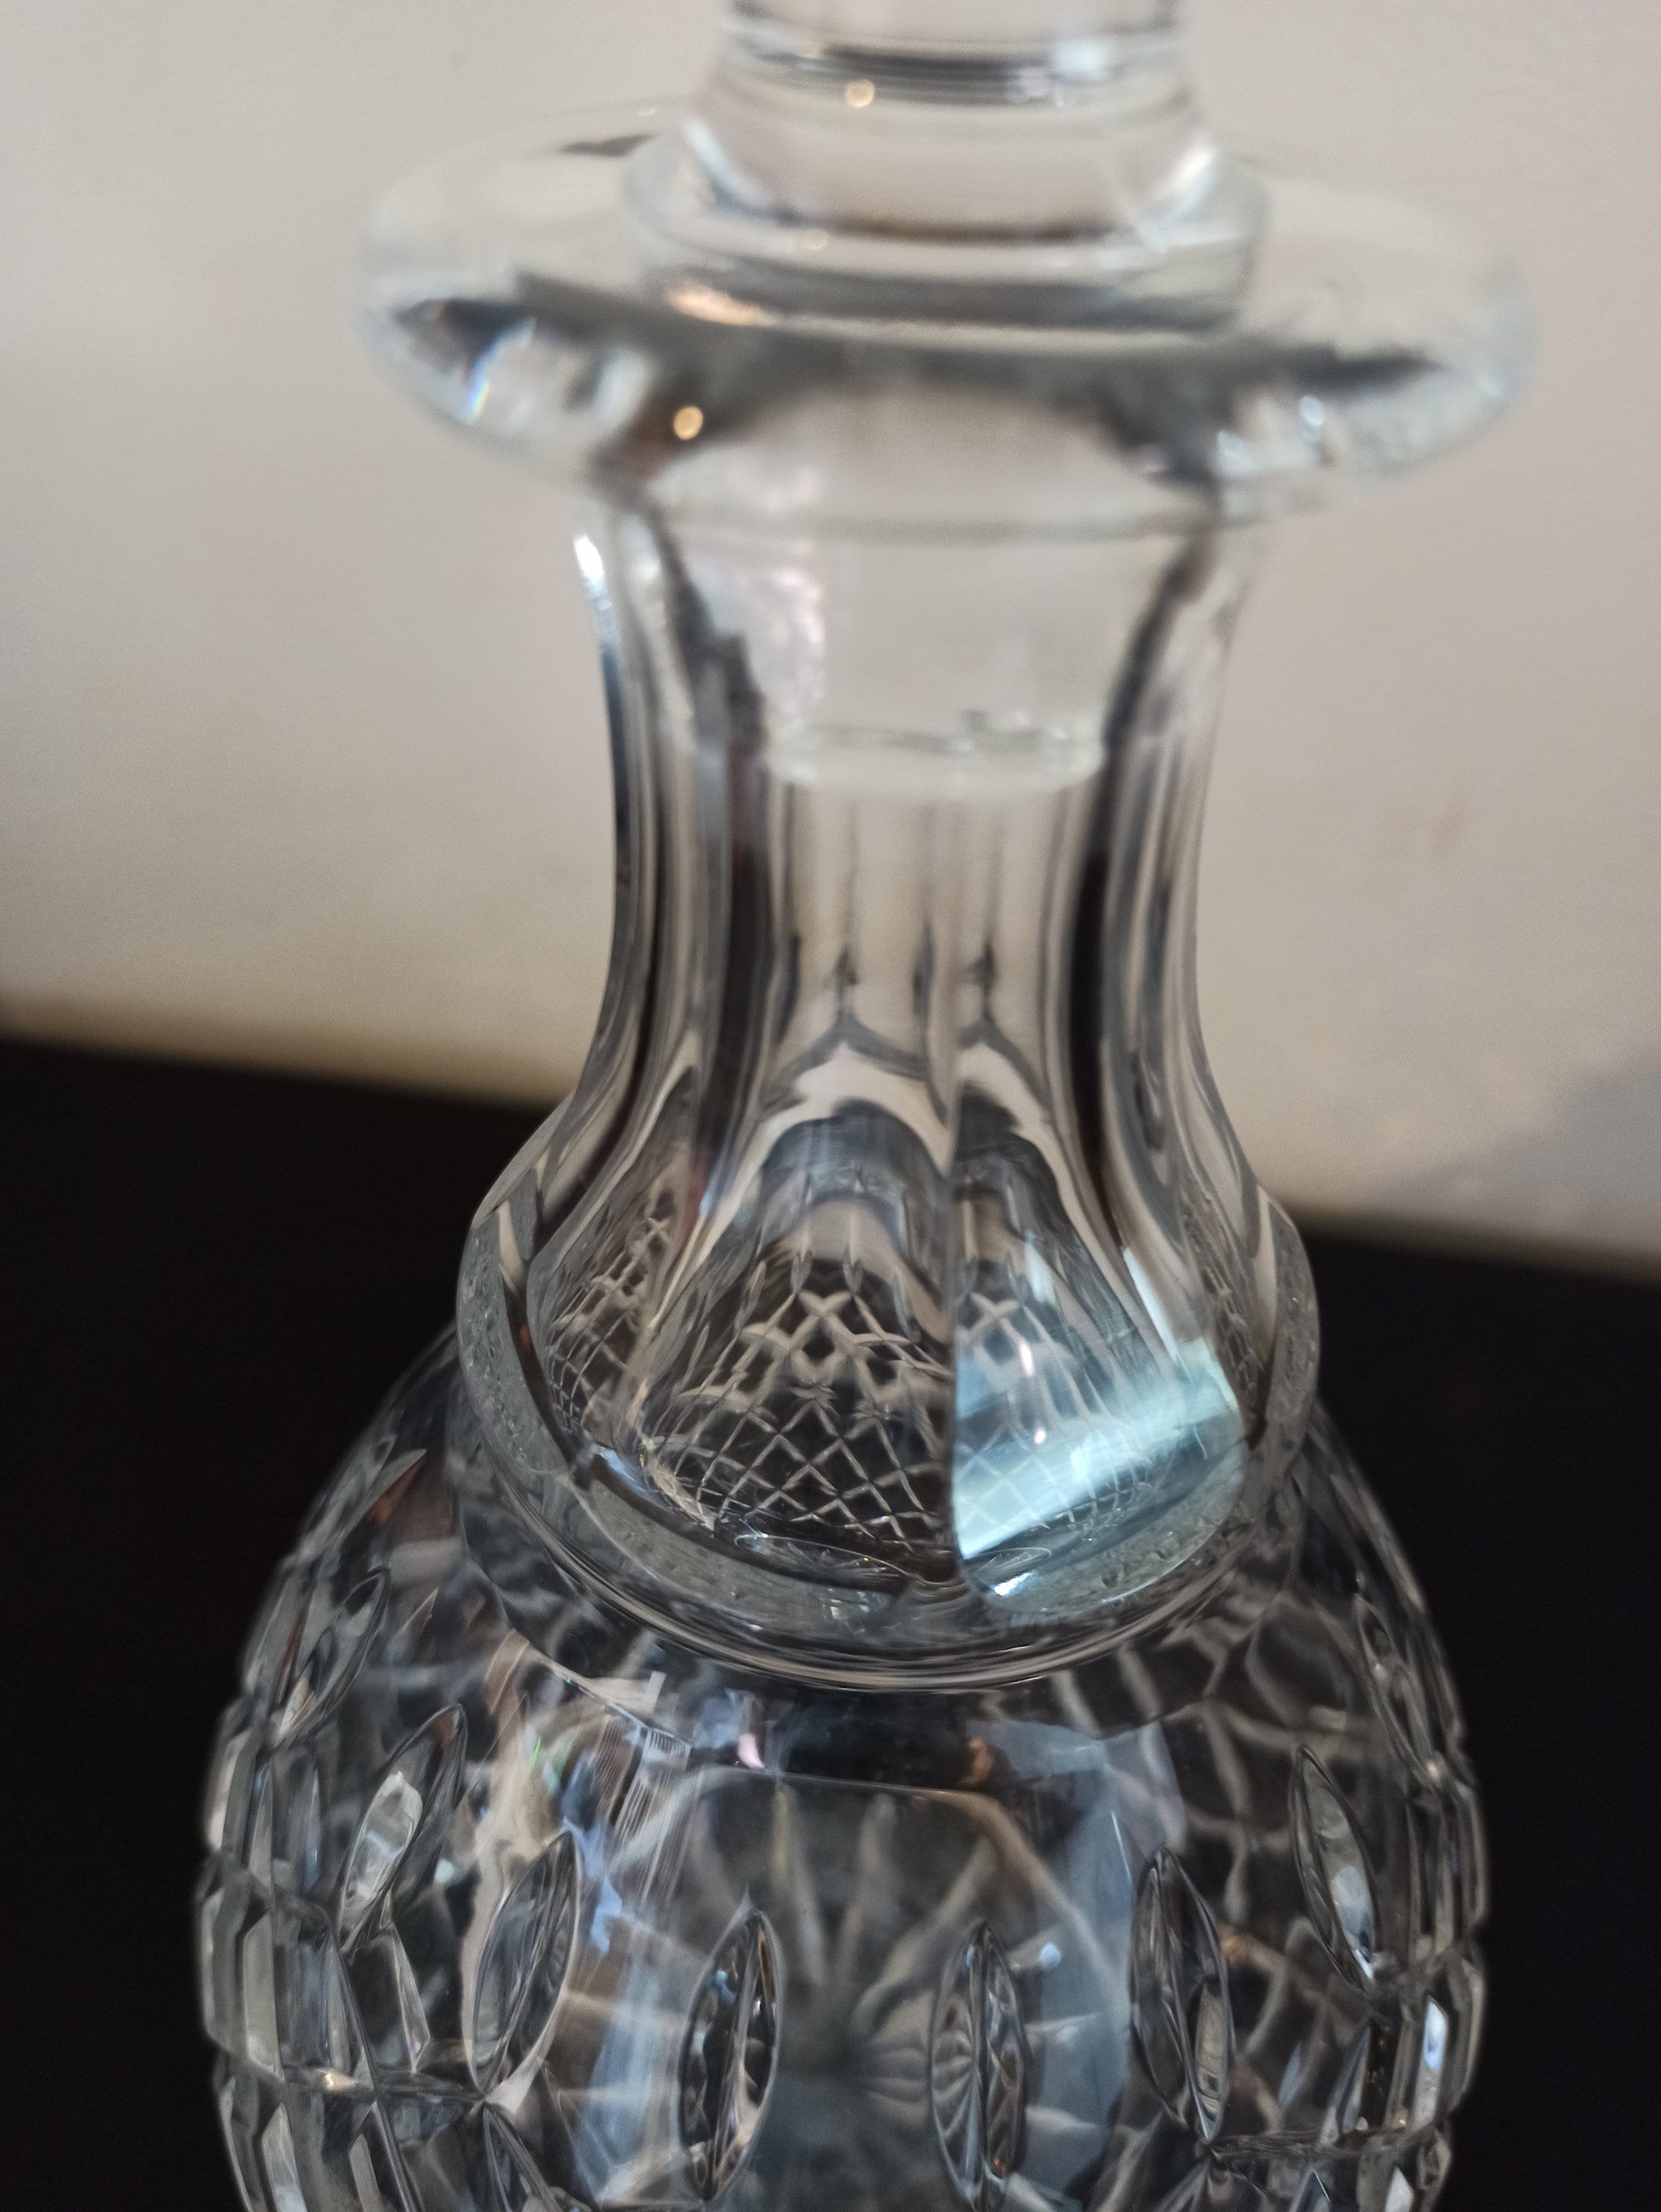 Vintage Handcut Lead Crystal Brandy Decanter With Stopper 10.25 by